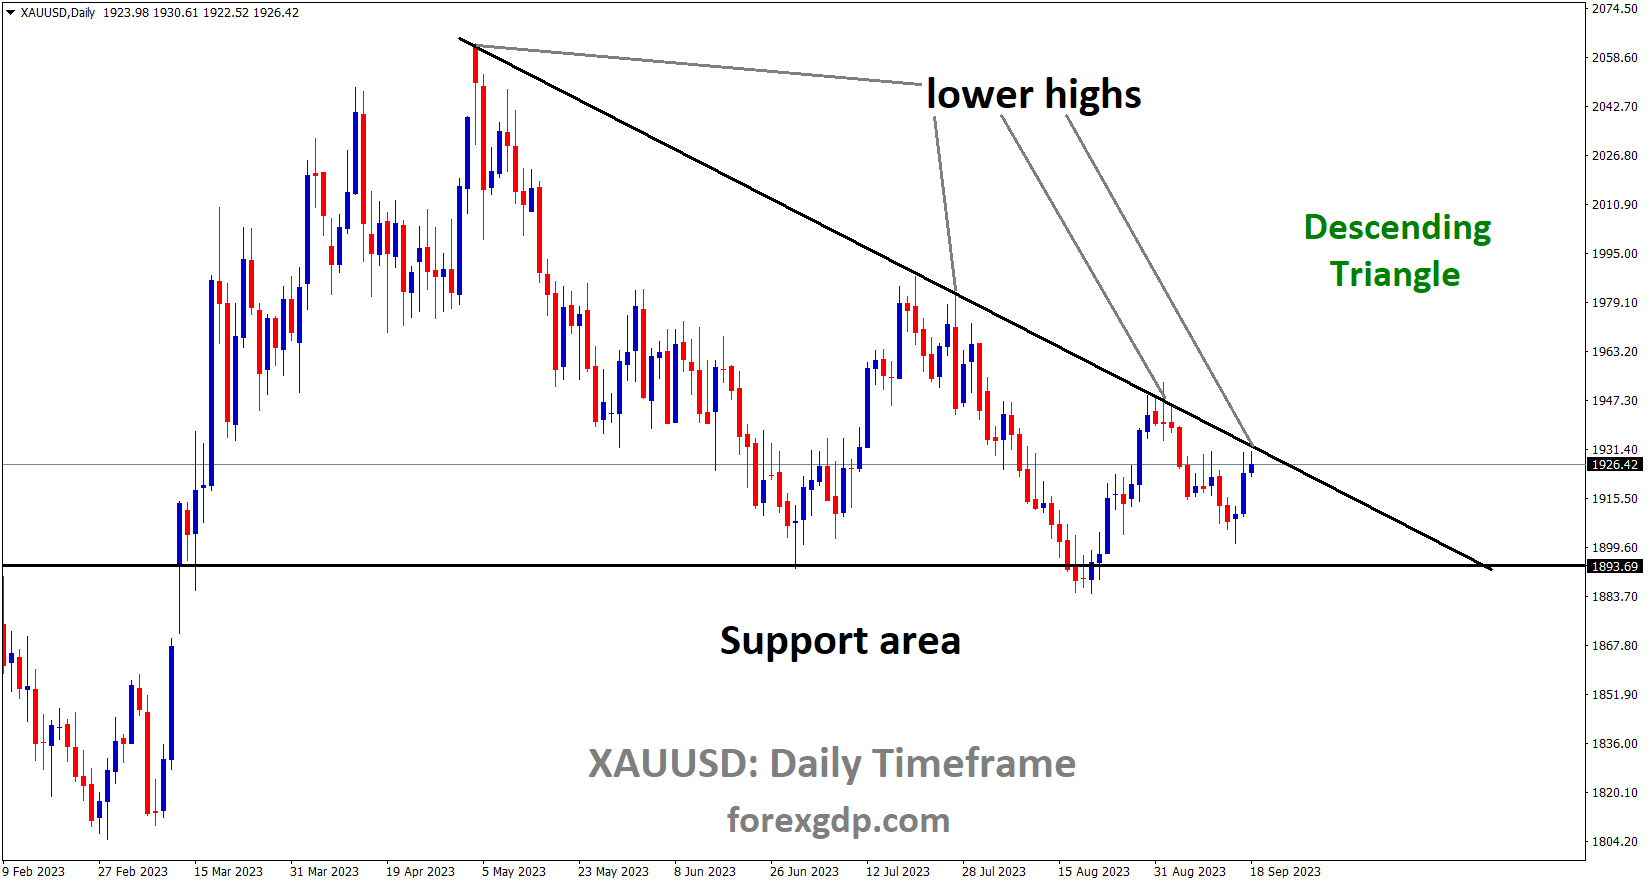 XAUUSD Gold price is moving in the Descending triangle pattern and the market has reached the lower high area of the pattern.